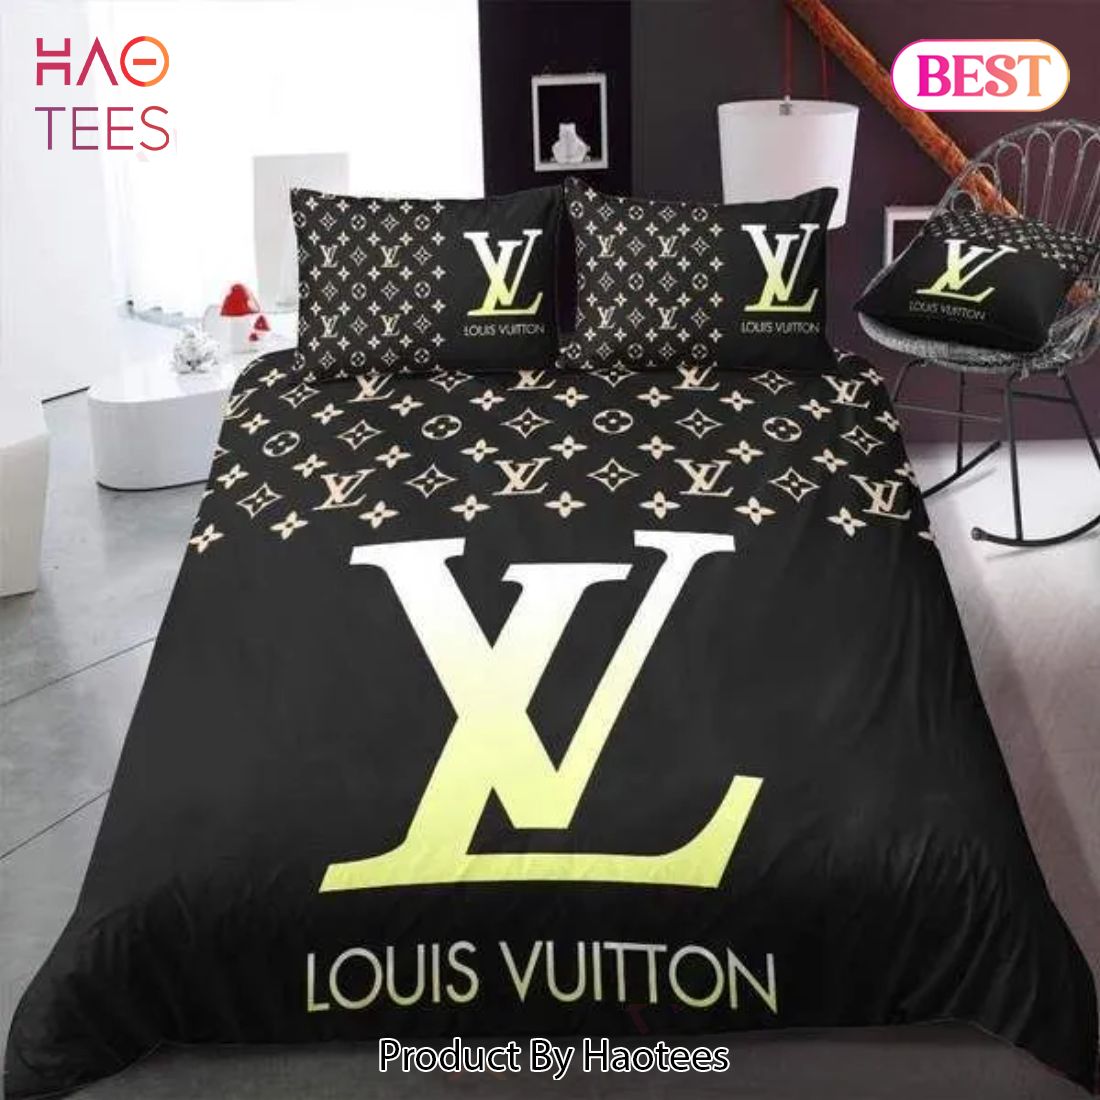 Louis Vuitton Bedding  Lux Decor and Spreads